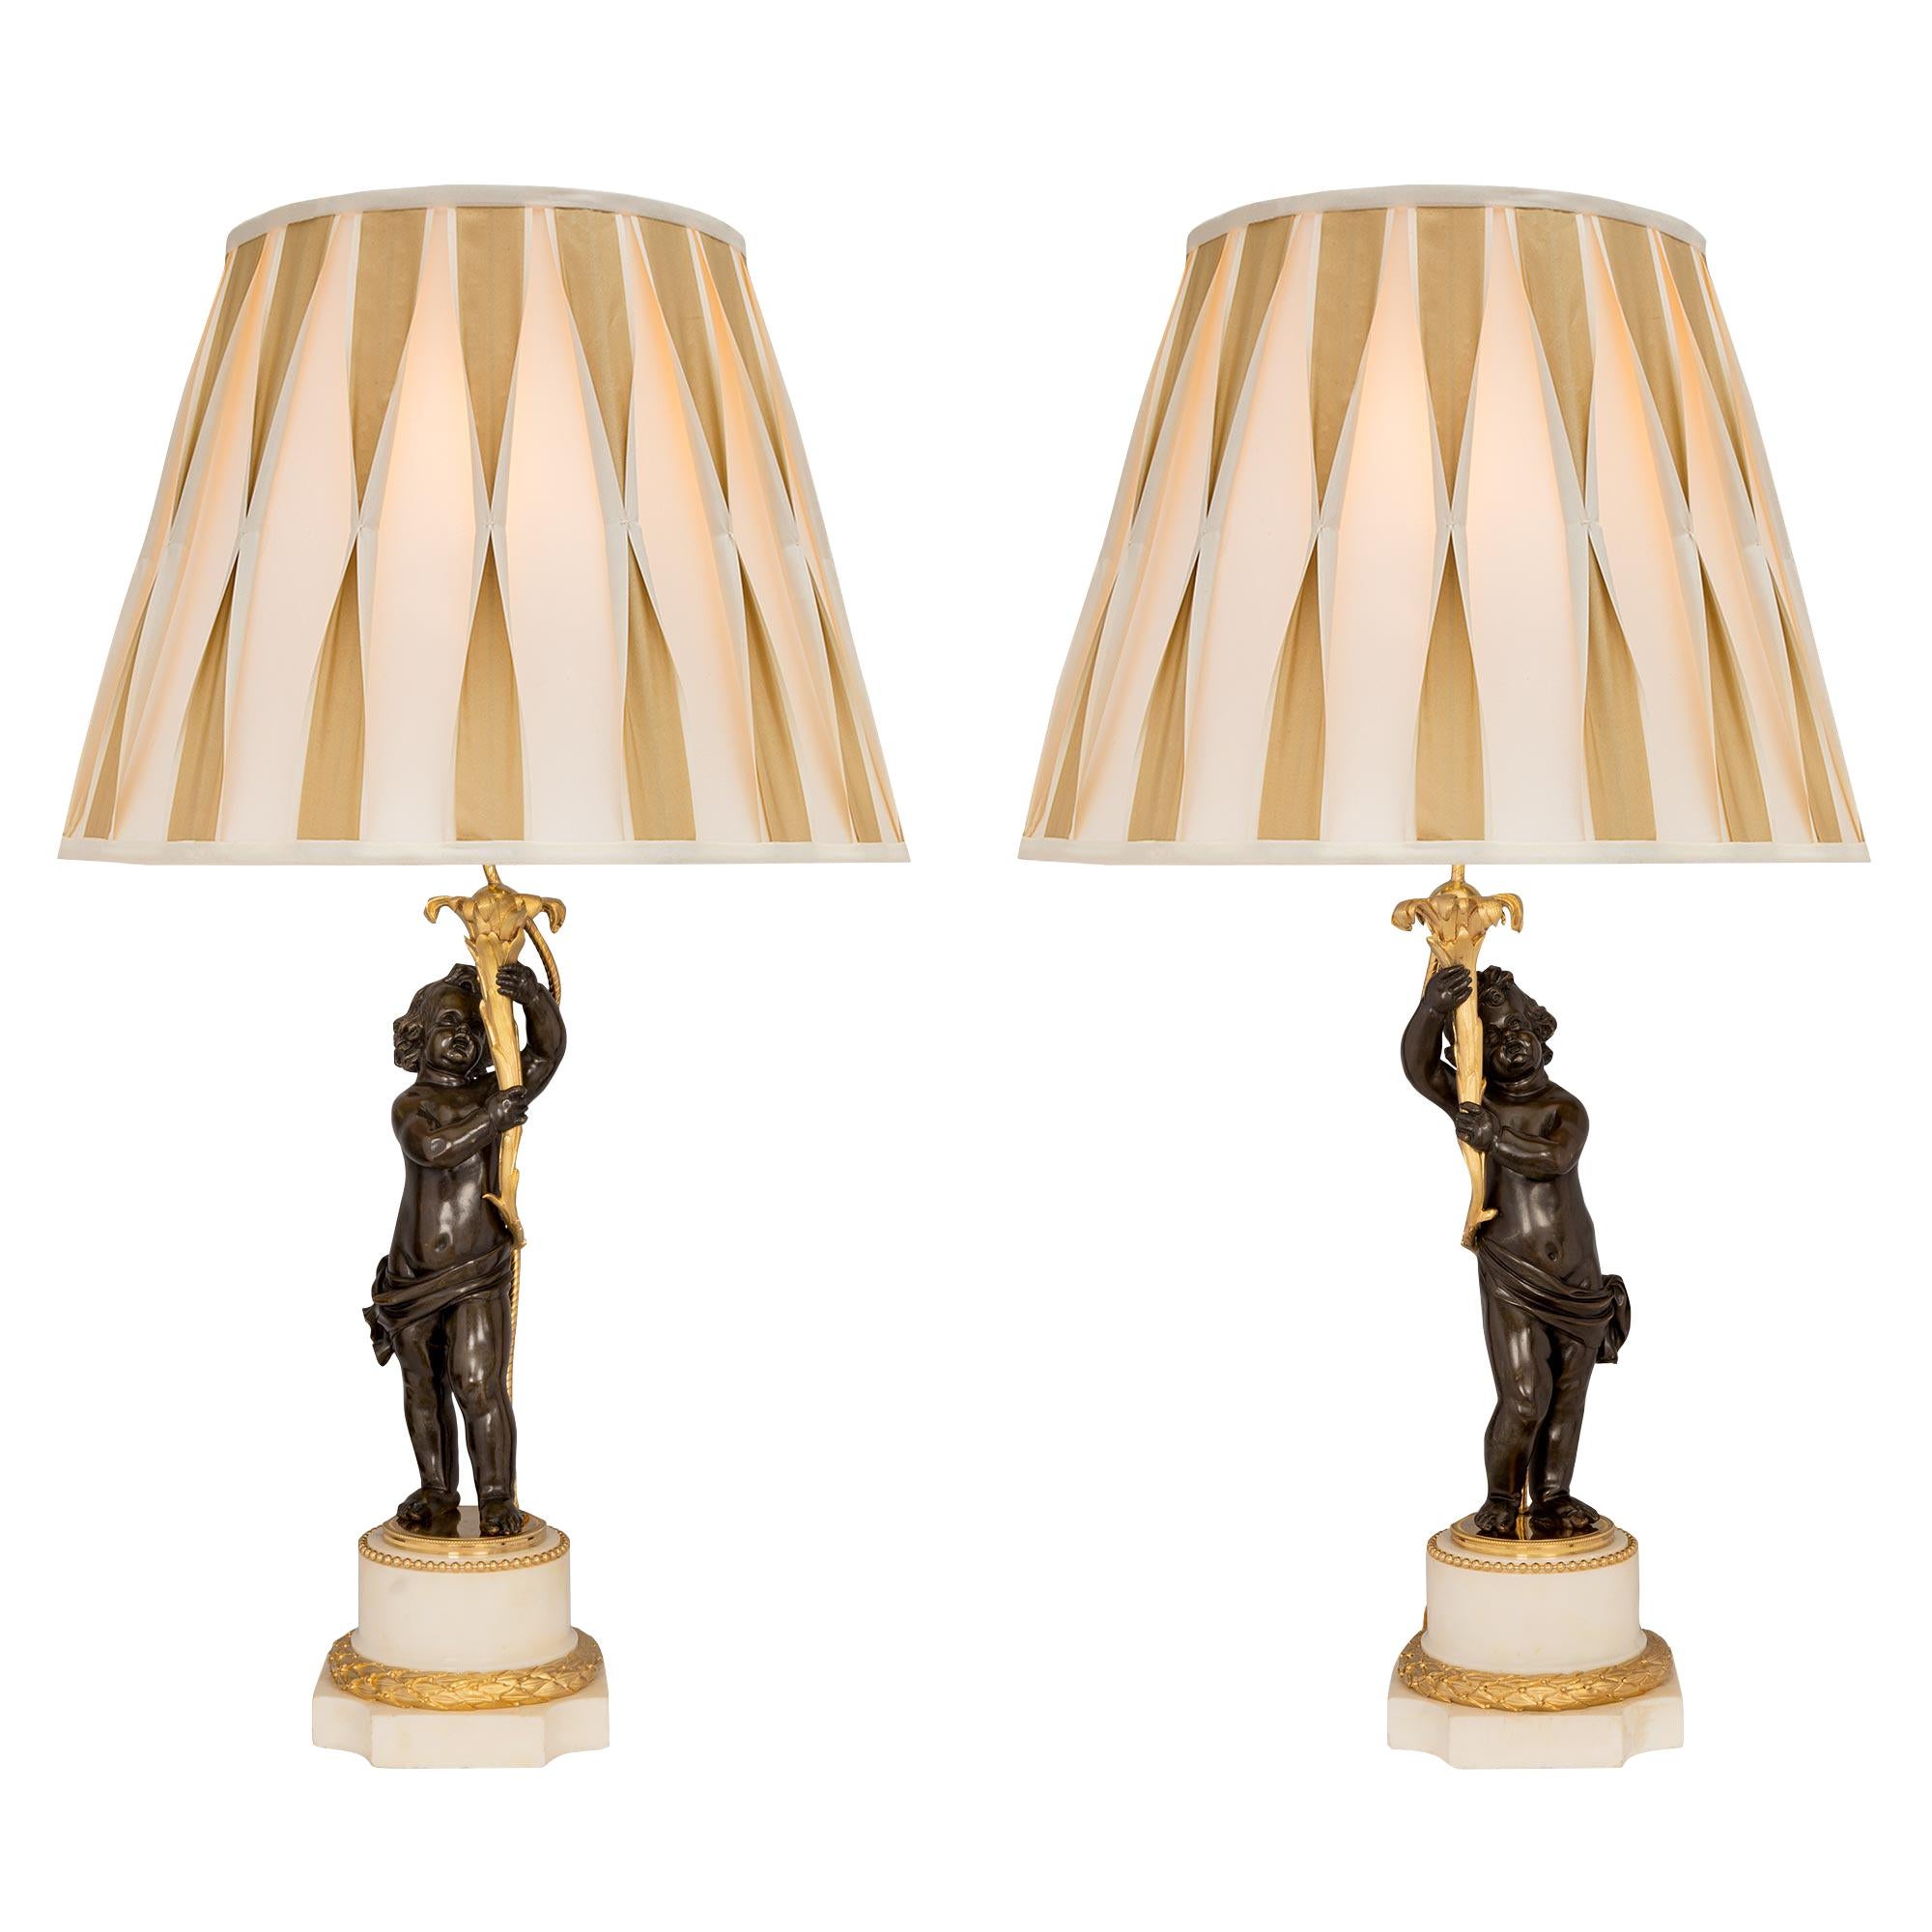 True Pair of French 19th Century Louis XVI Style Bronze and Ormolu Lamps For Sale